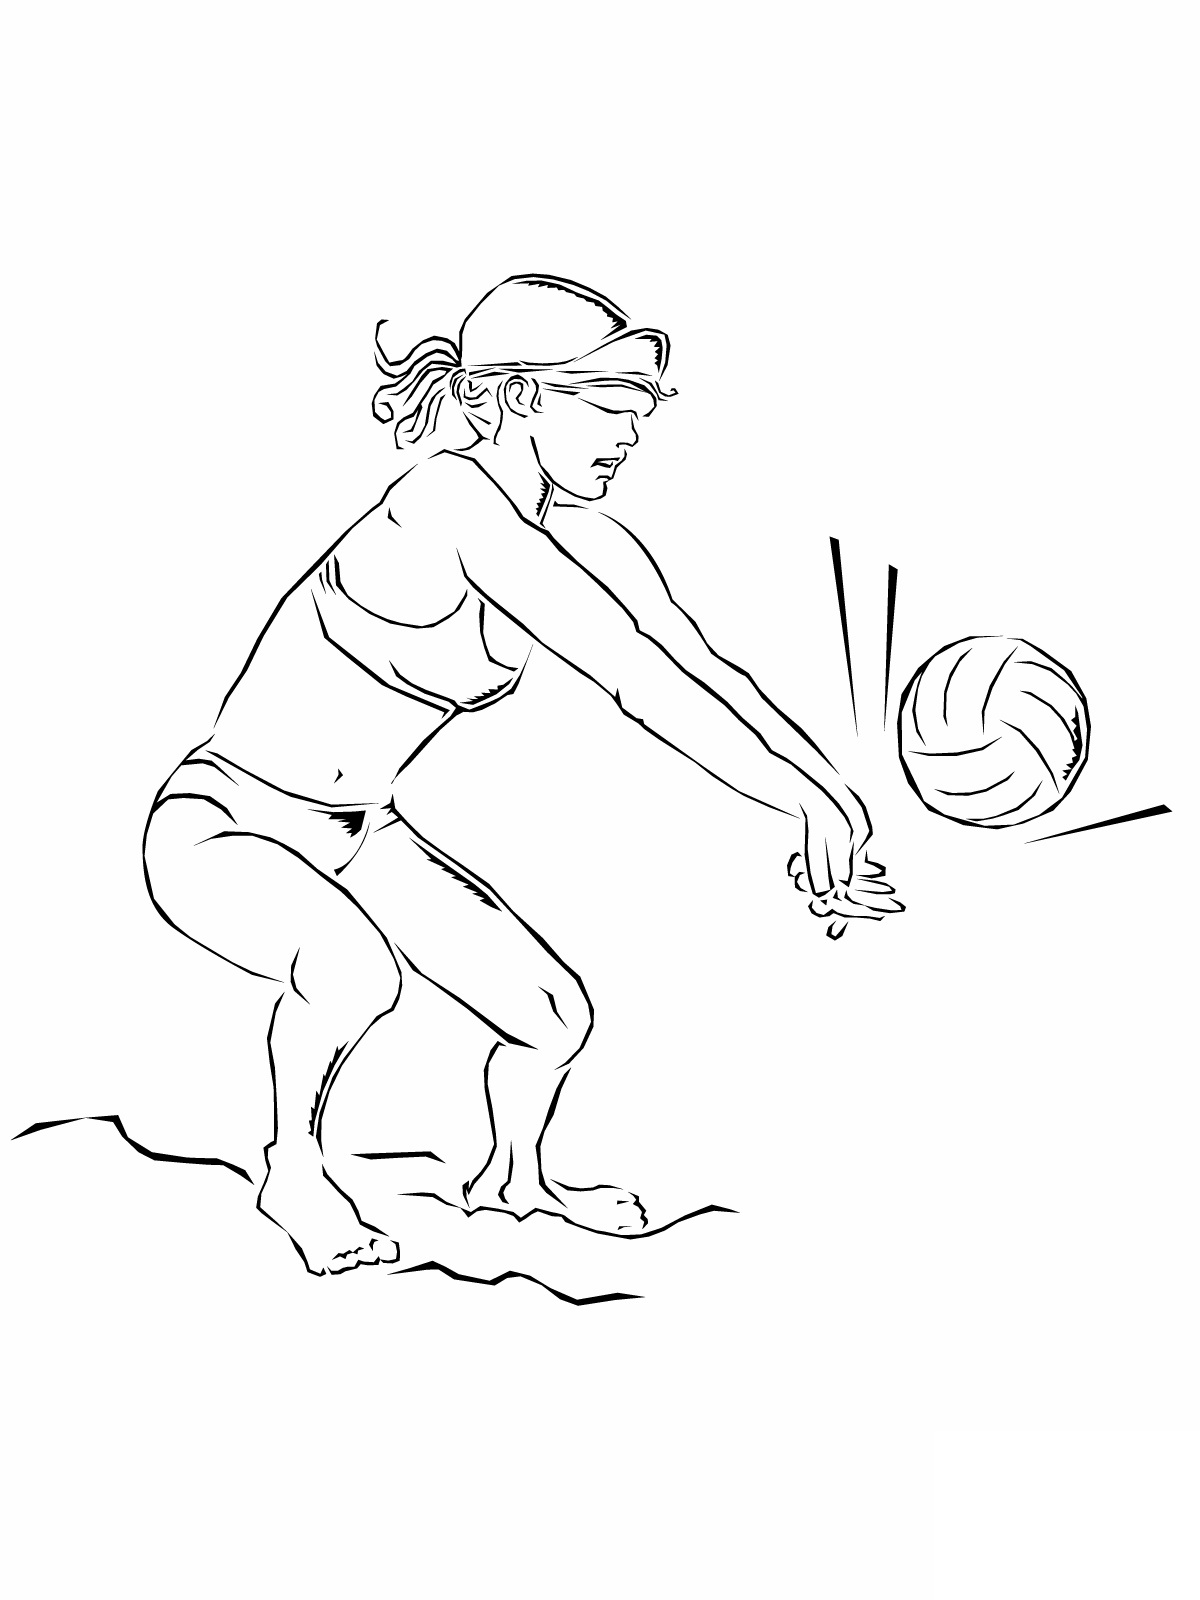 Volleyballs To Print